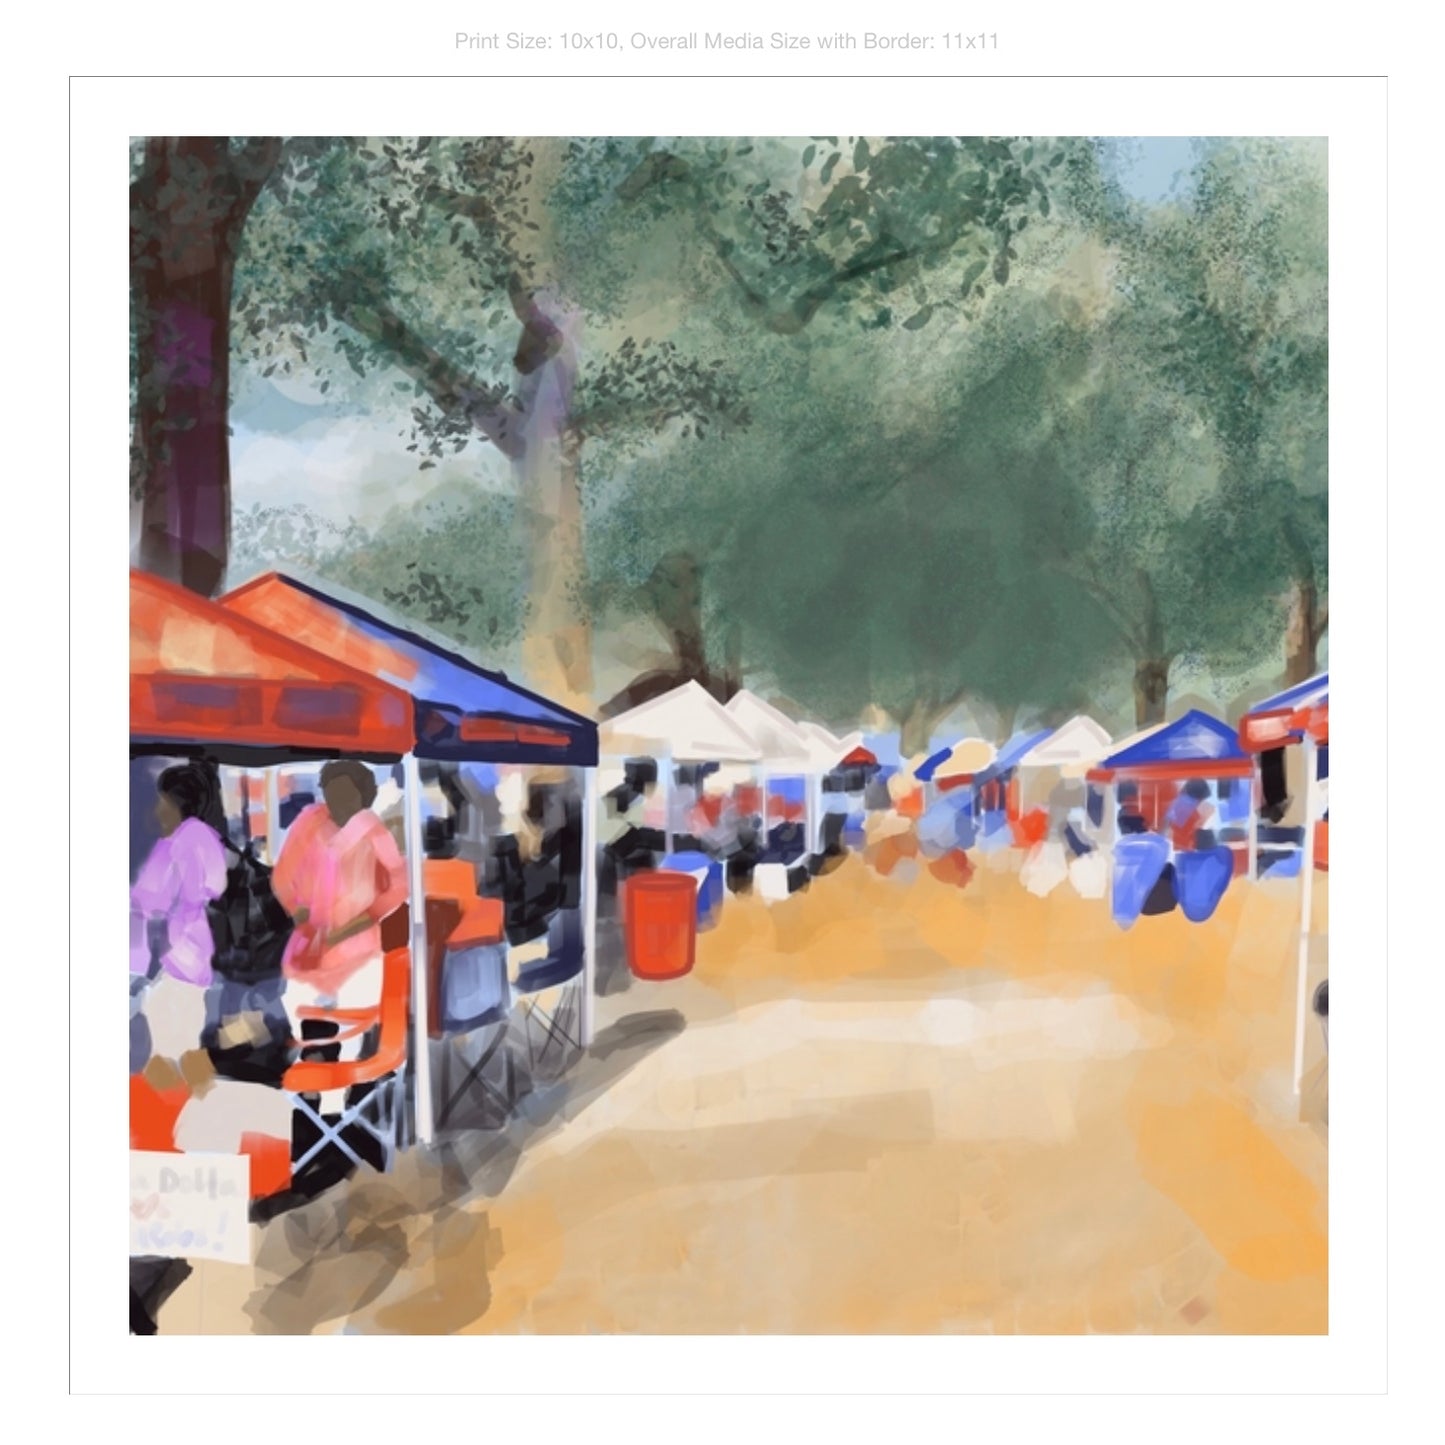 Tents in The Grove Giclee on Premium Heavyweight Paper